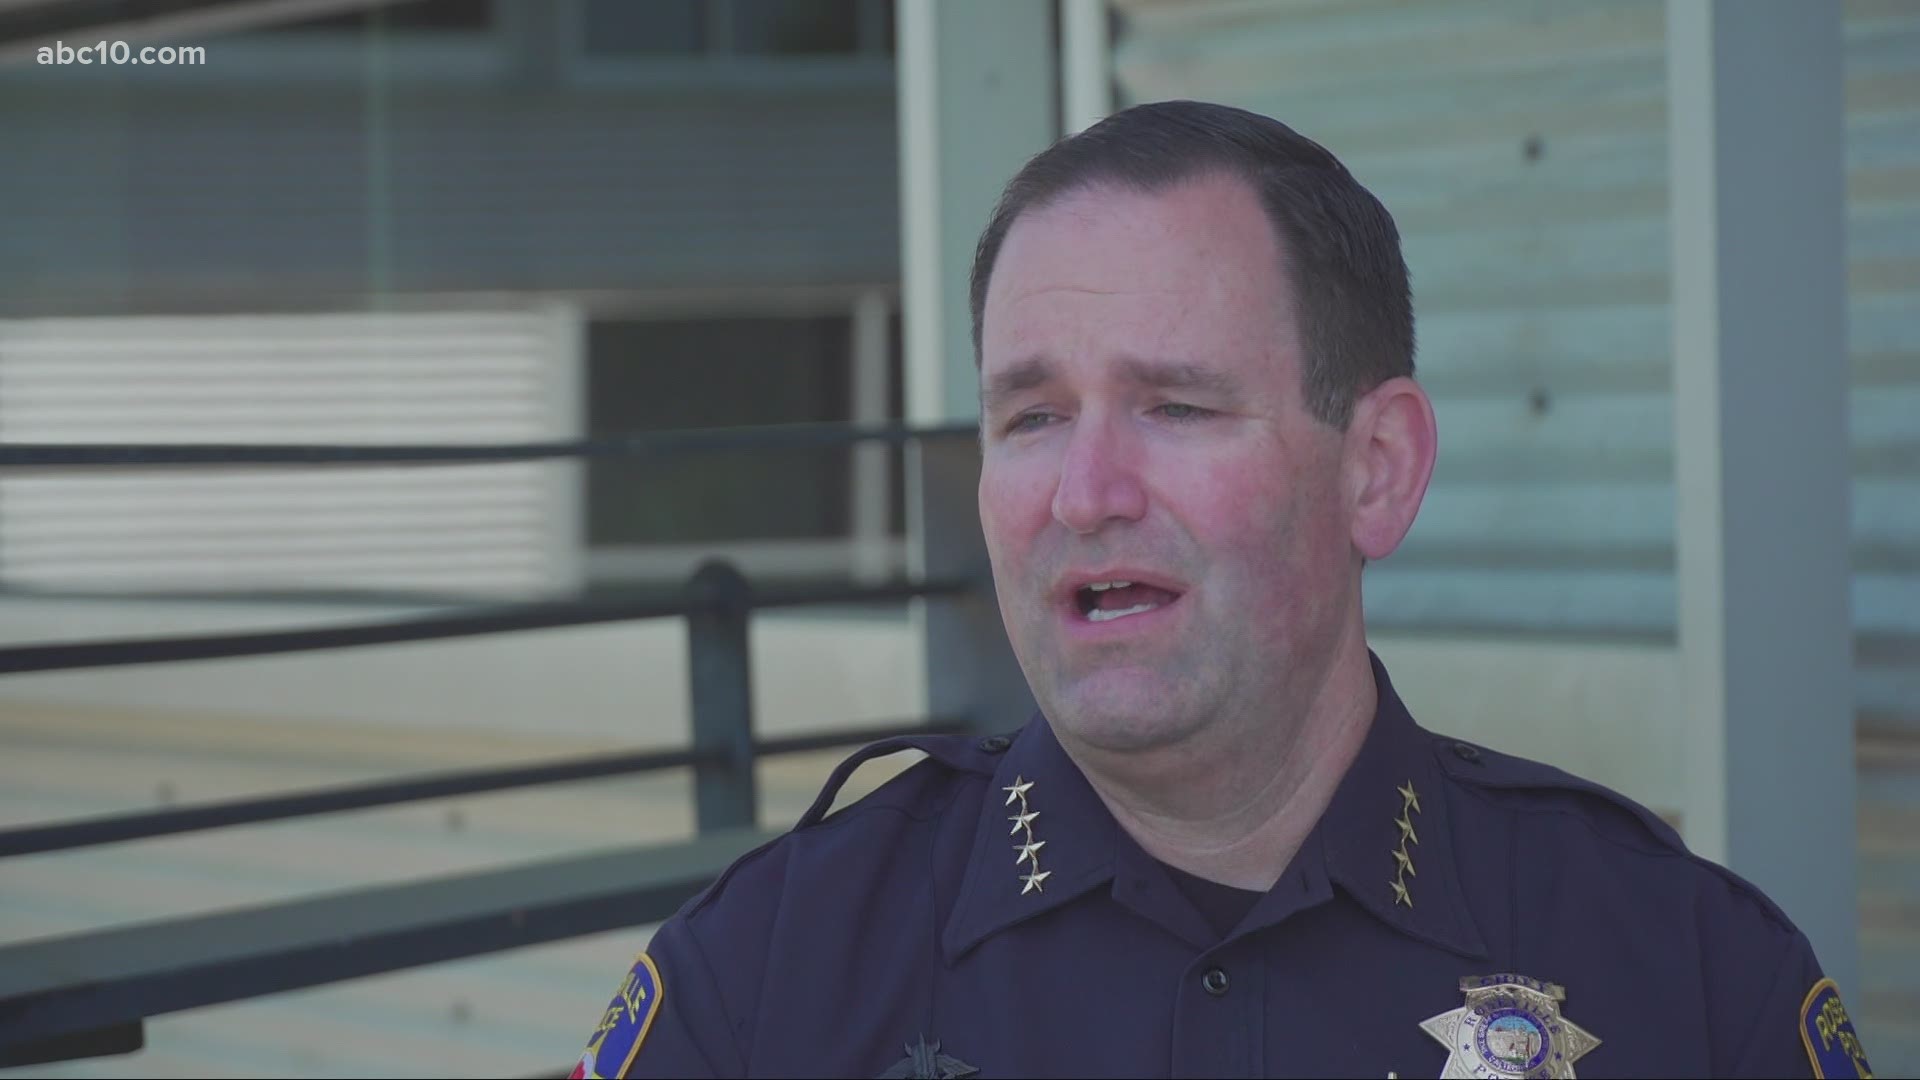 Incoming Roseville Police Chief Troy Bergstrom spoke to ABC10 about his goals for the department ahead of his swearing-in ceremony.